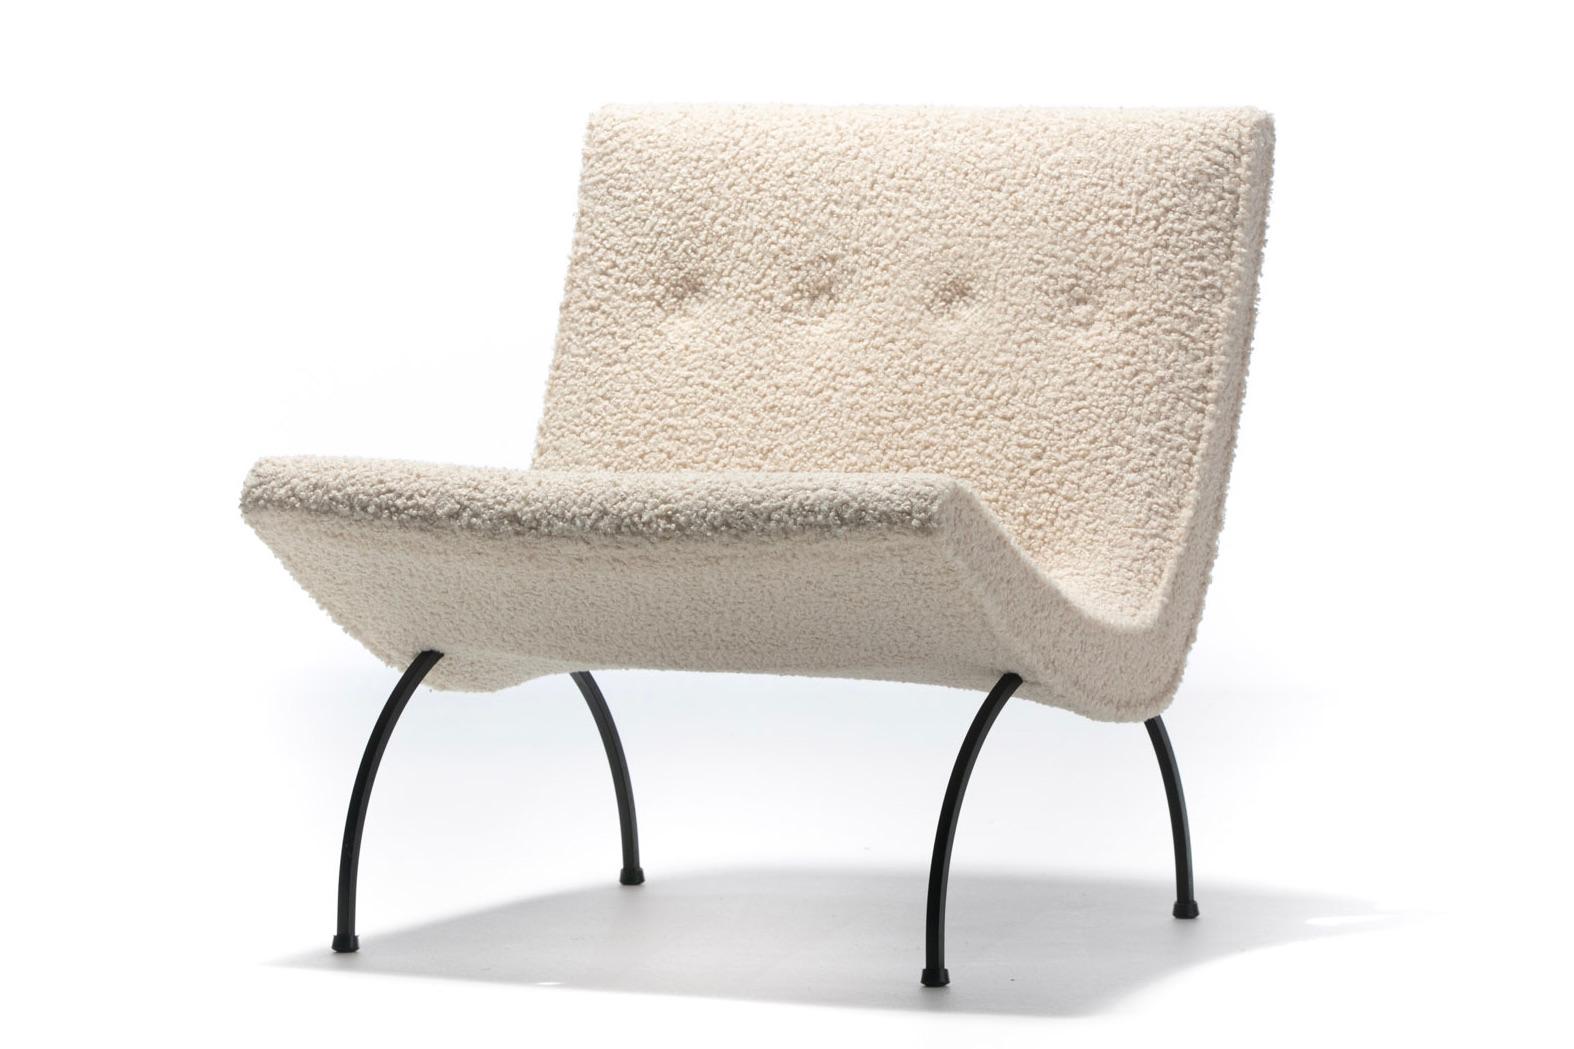 Milo Baughman Scoop Chair in Super Soft Ivory Bouclé with Iron Legs c. 1950s  For Sale 3